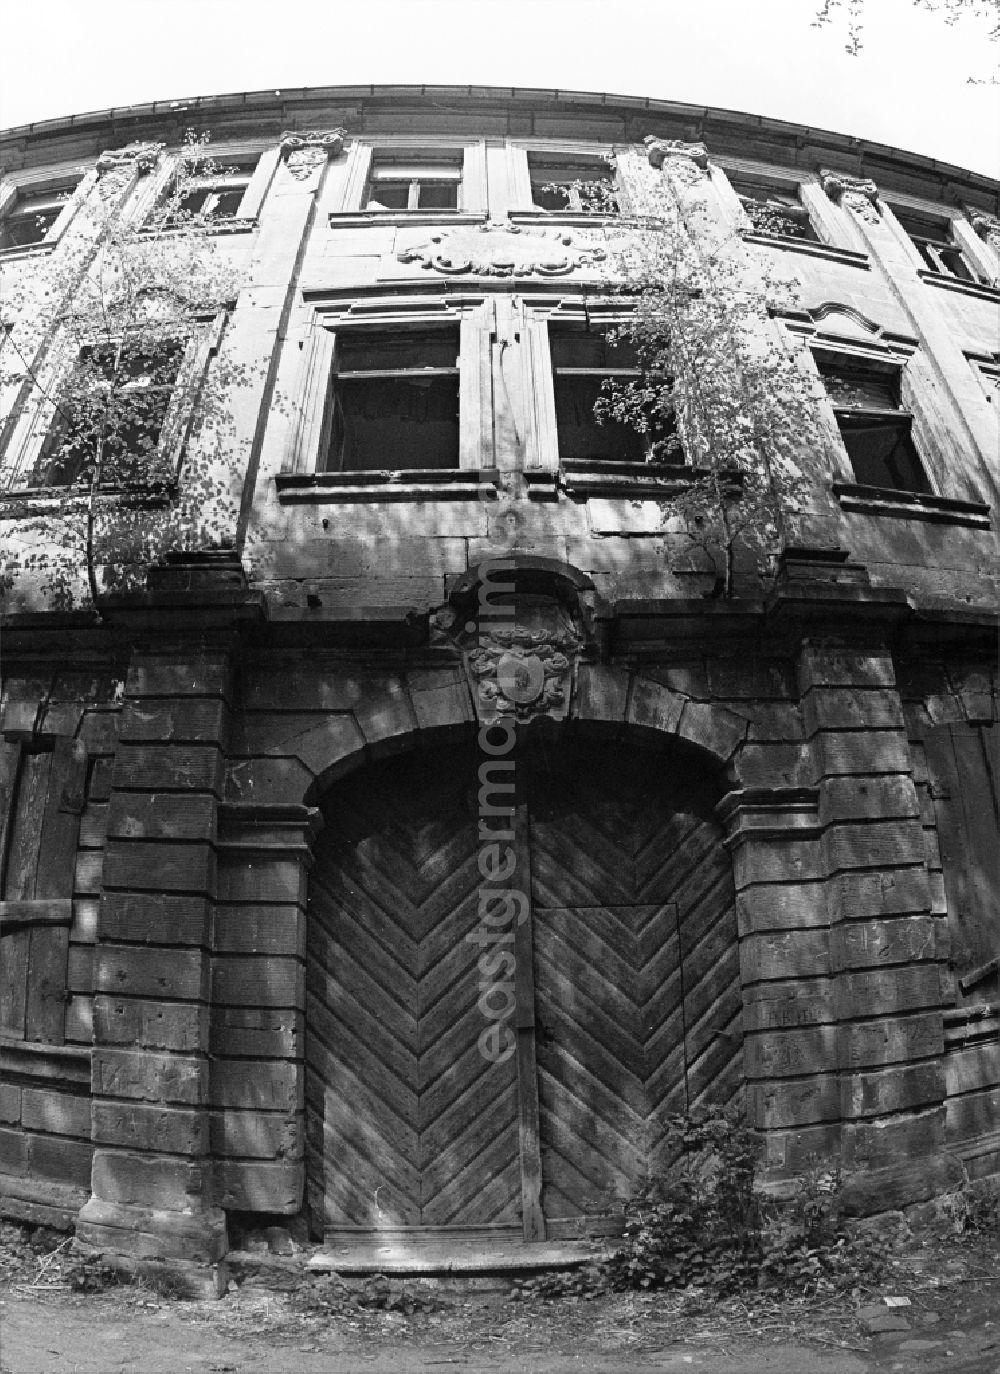 GDR picture archive: Halberstadt - Gate to the entrance area of a decaying apartment building ruin on street Duesterngraben in Halberstadt in the state Saxony-Anhalt on the territory of the former GDR, German Democratic Republic